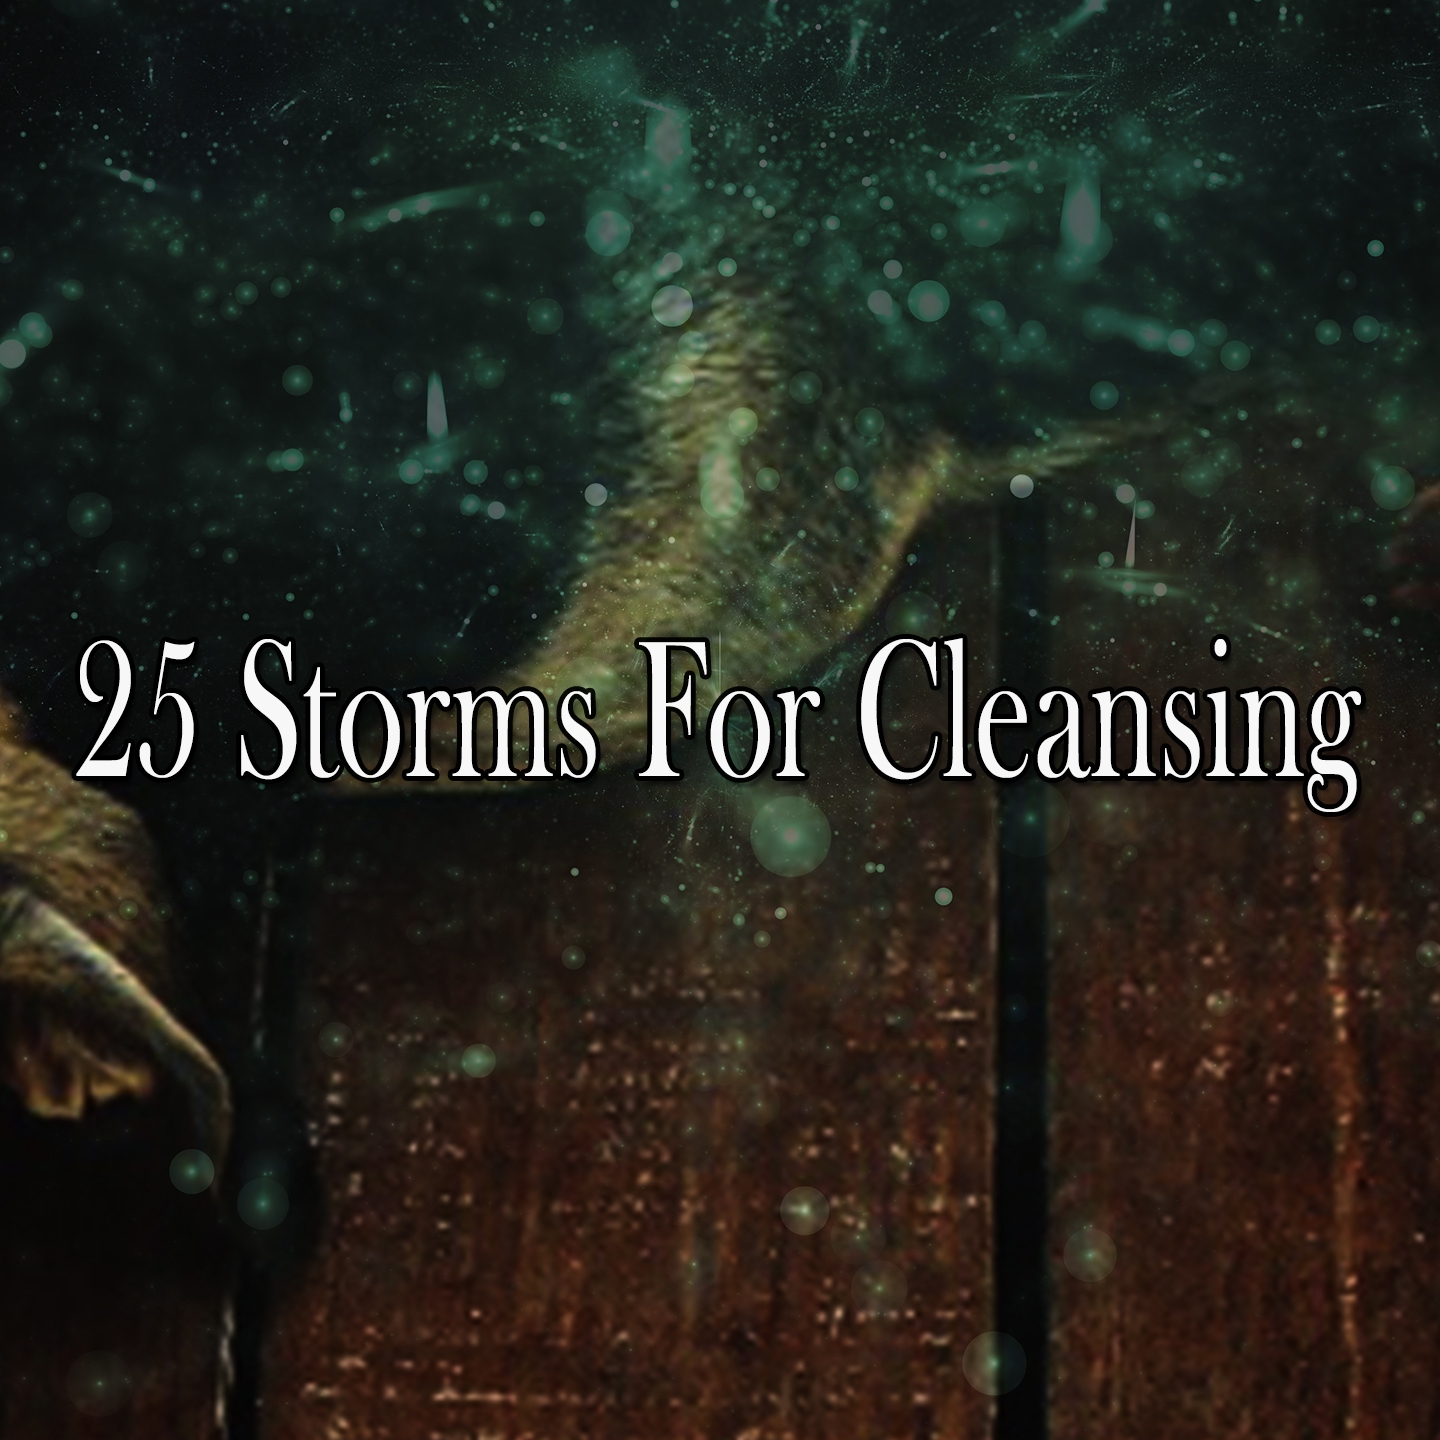 25 Storms For Cleansing